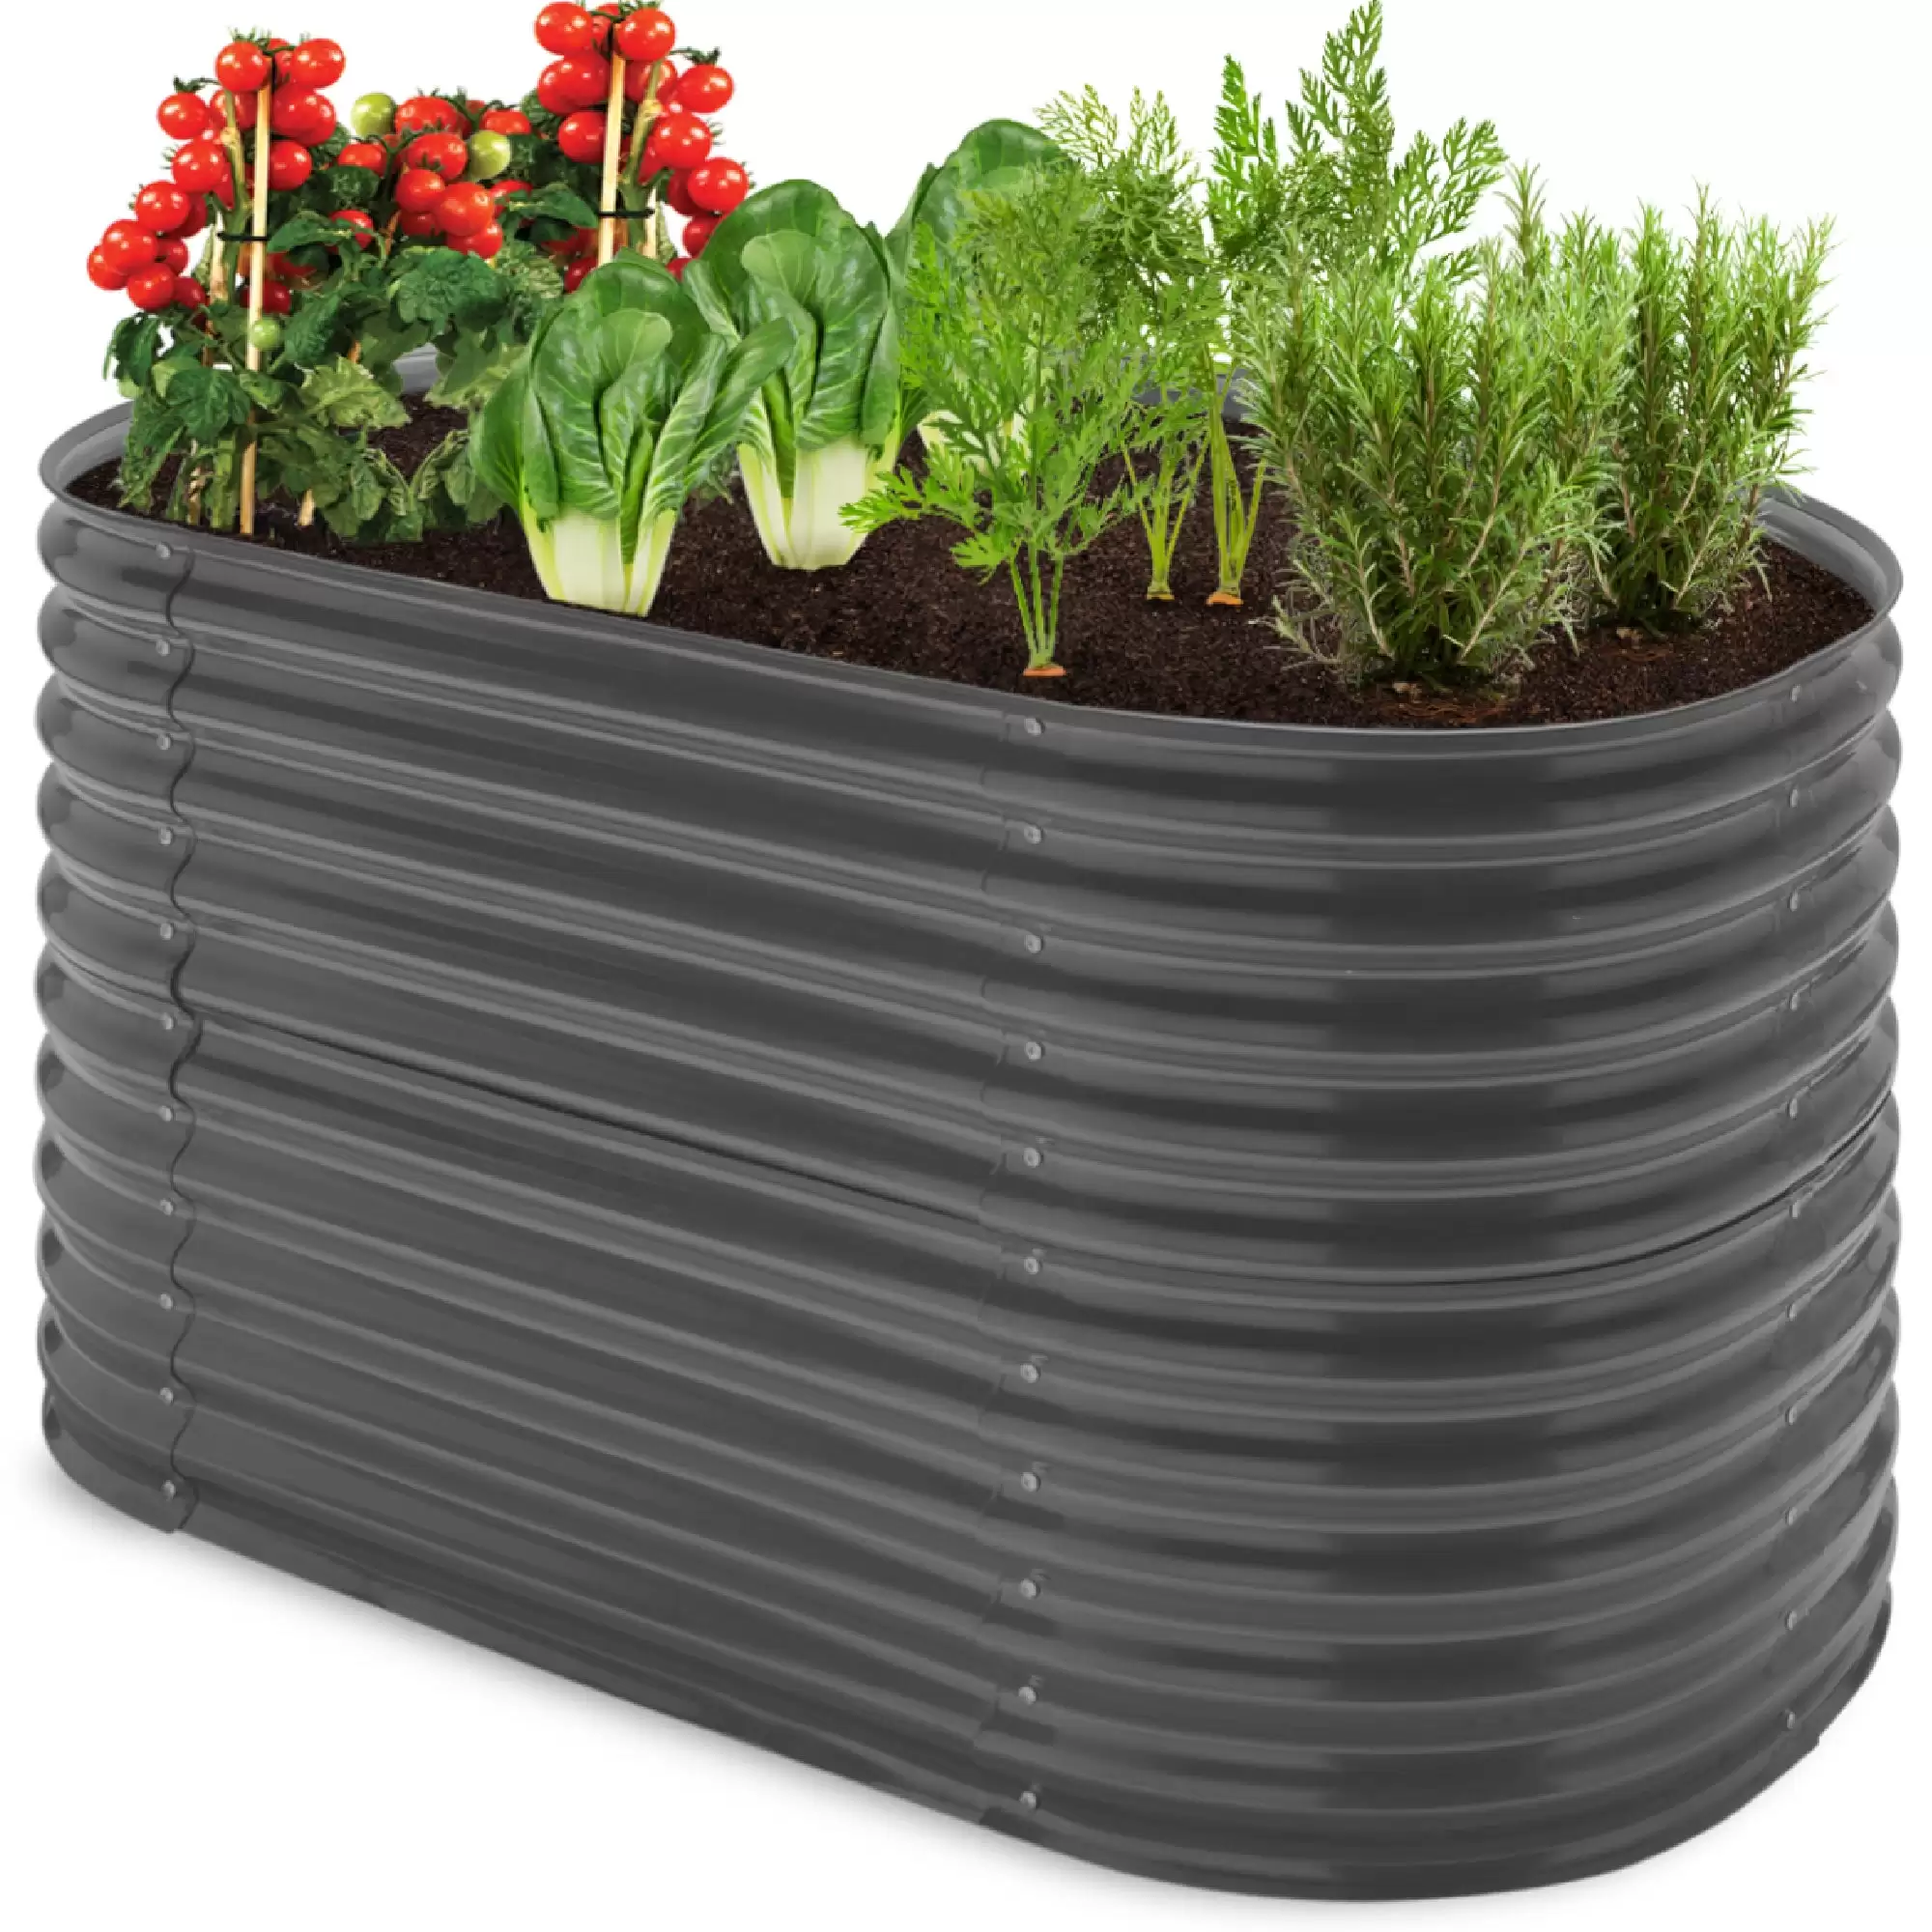 Pay $99.99 Raised Oval Garden Bed, Customizable Elevated Outdoor Metal Planter At Bestchoiceproducts